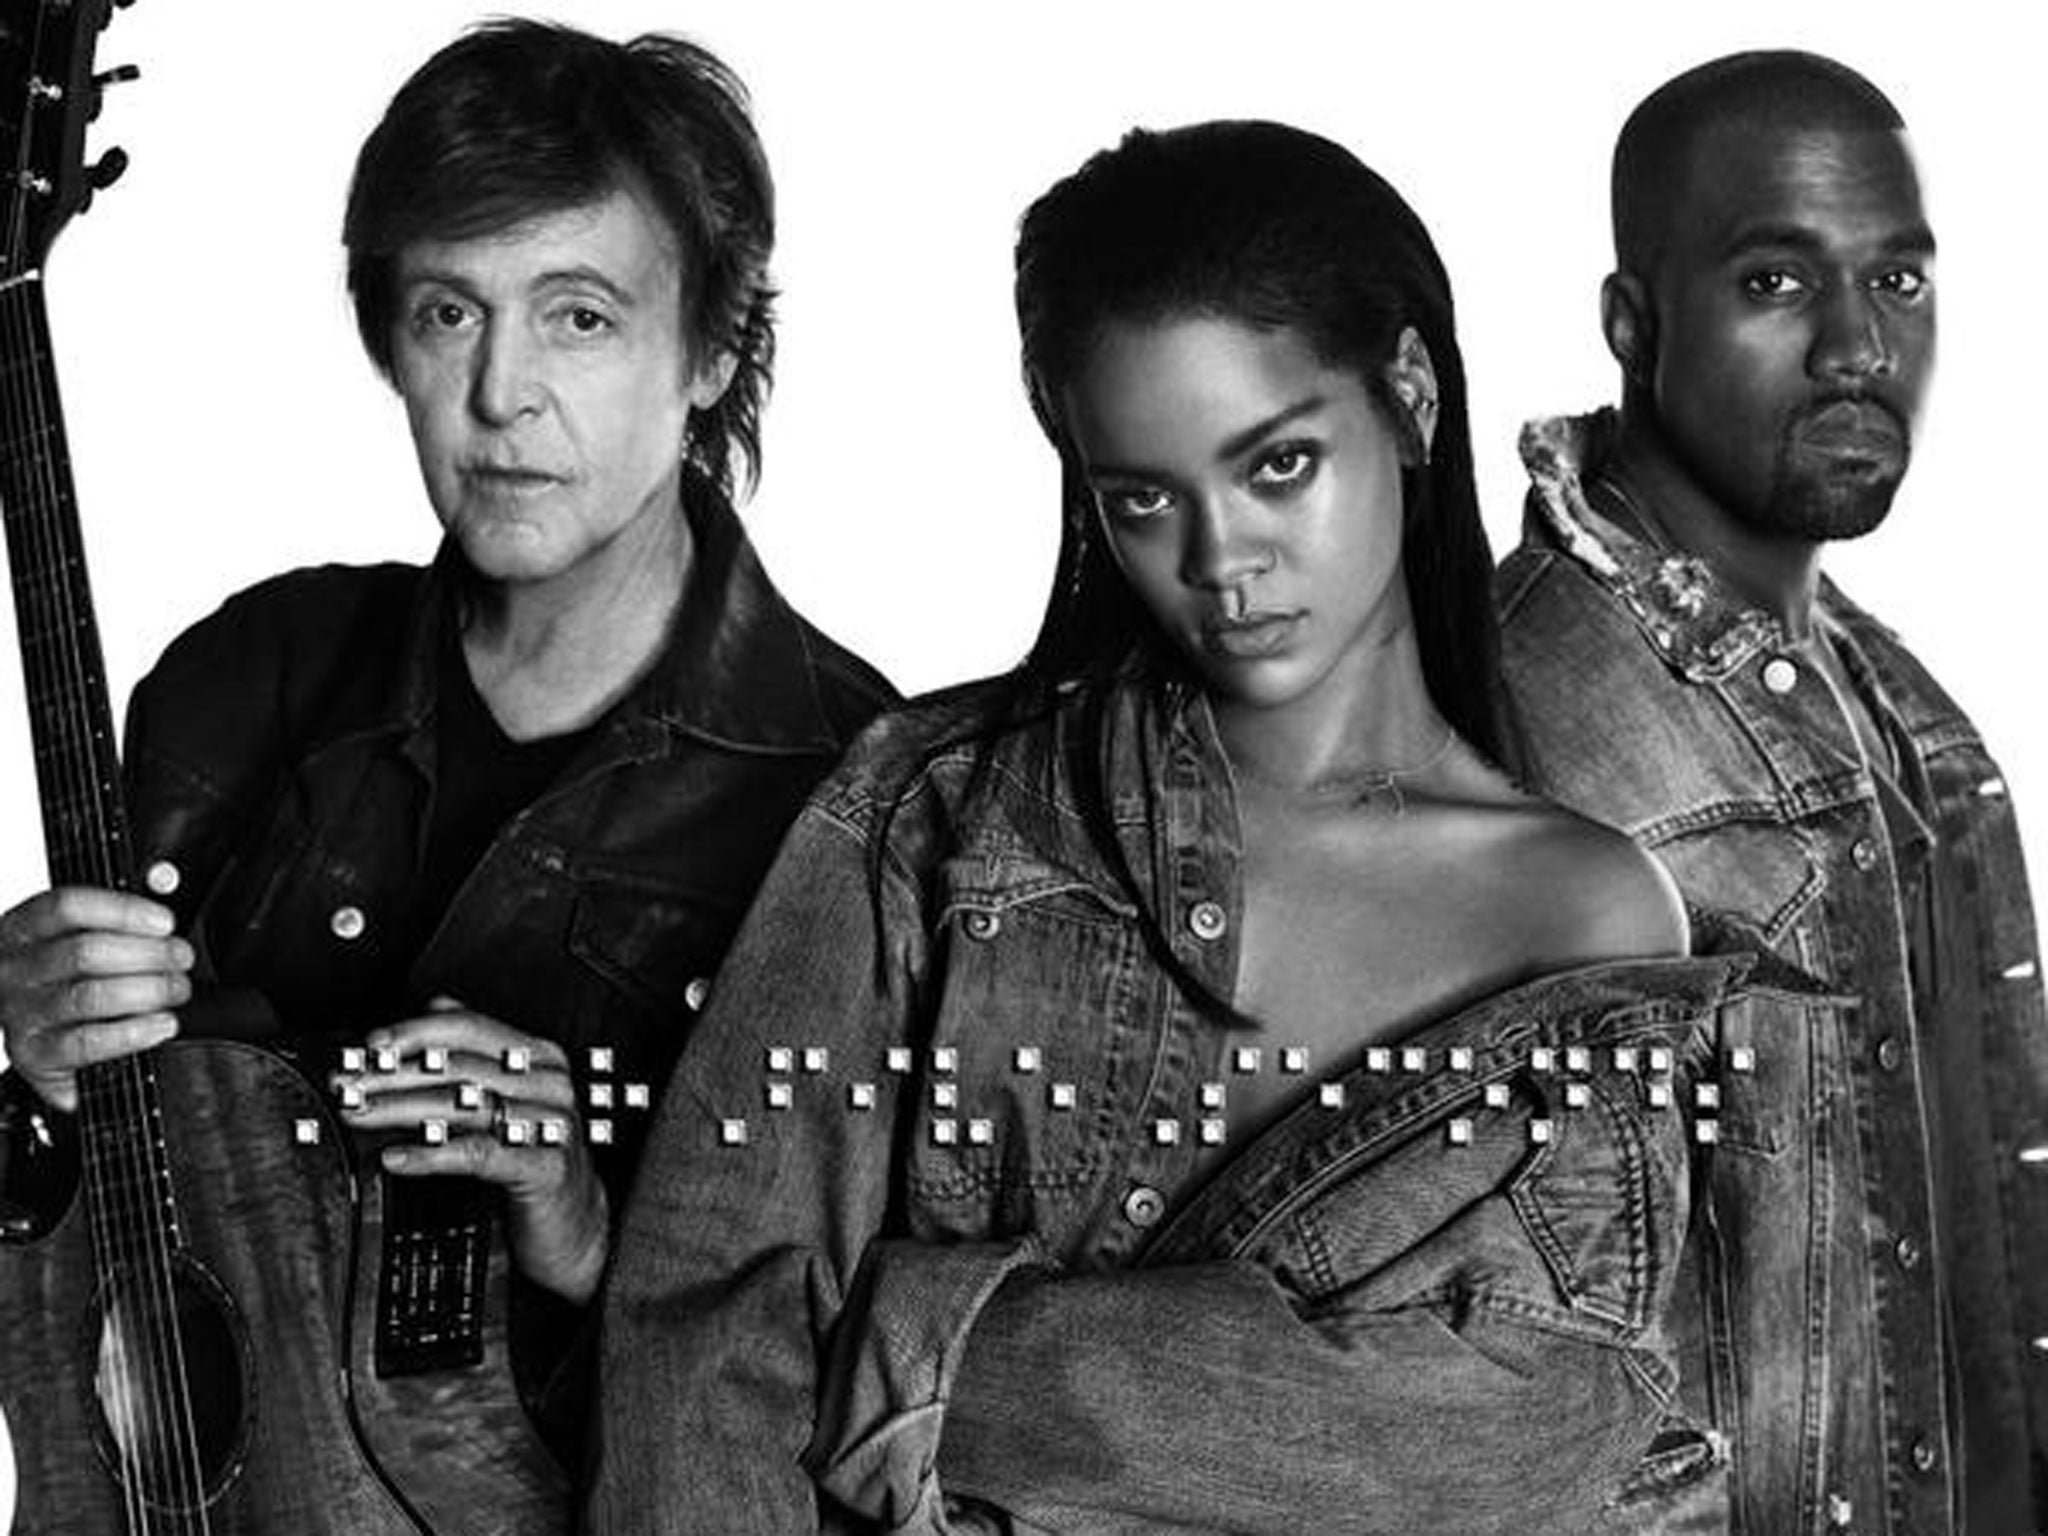 Sir Paul McCartney, Rihanna and Kanye West have teamed up for a new track